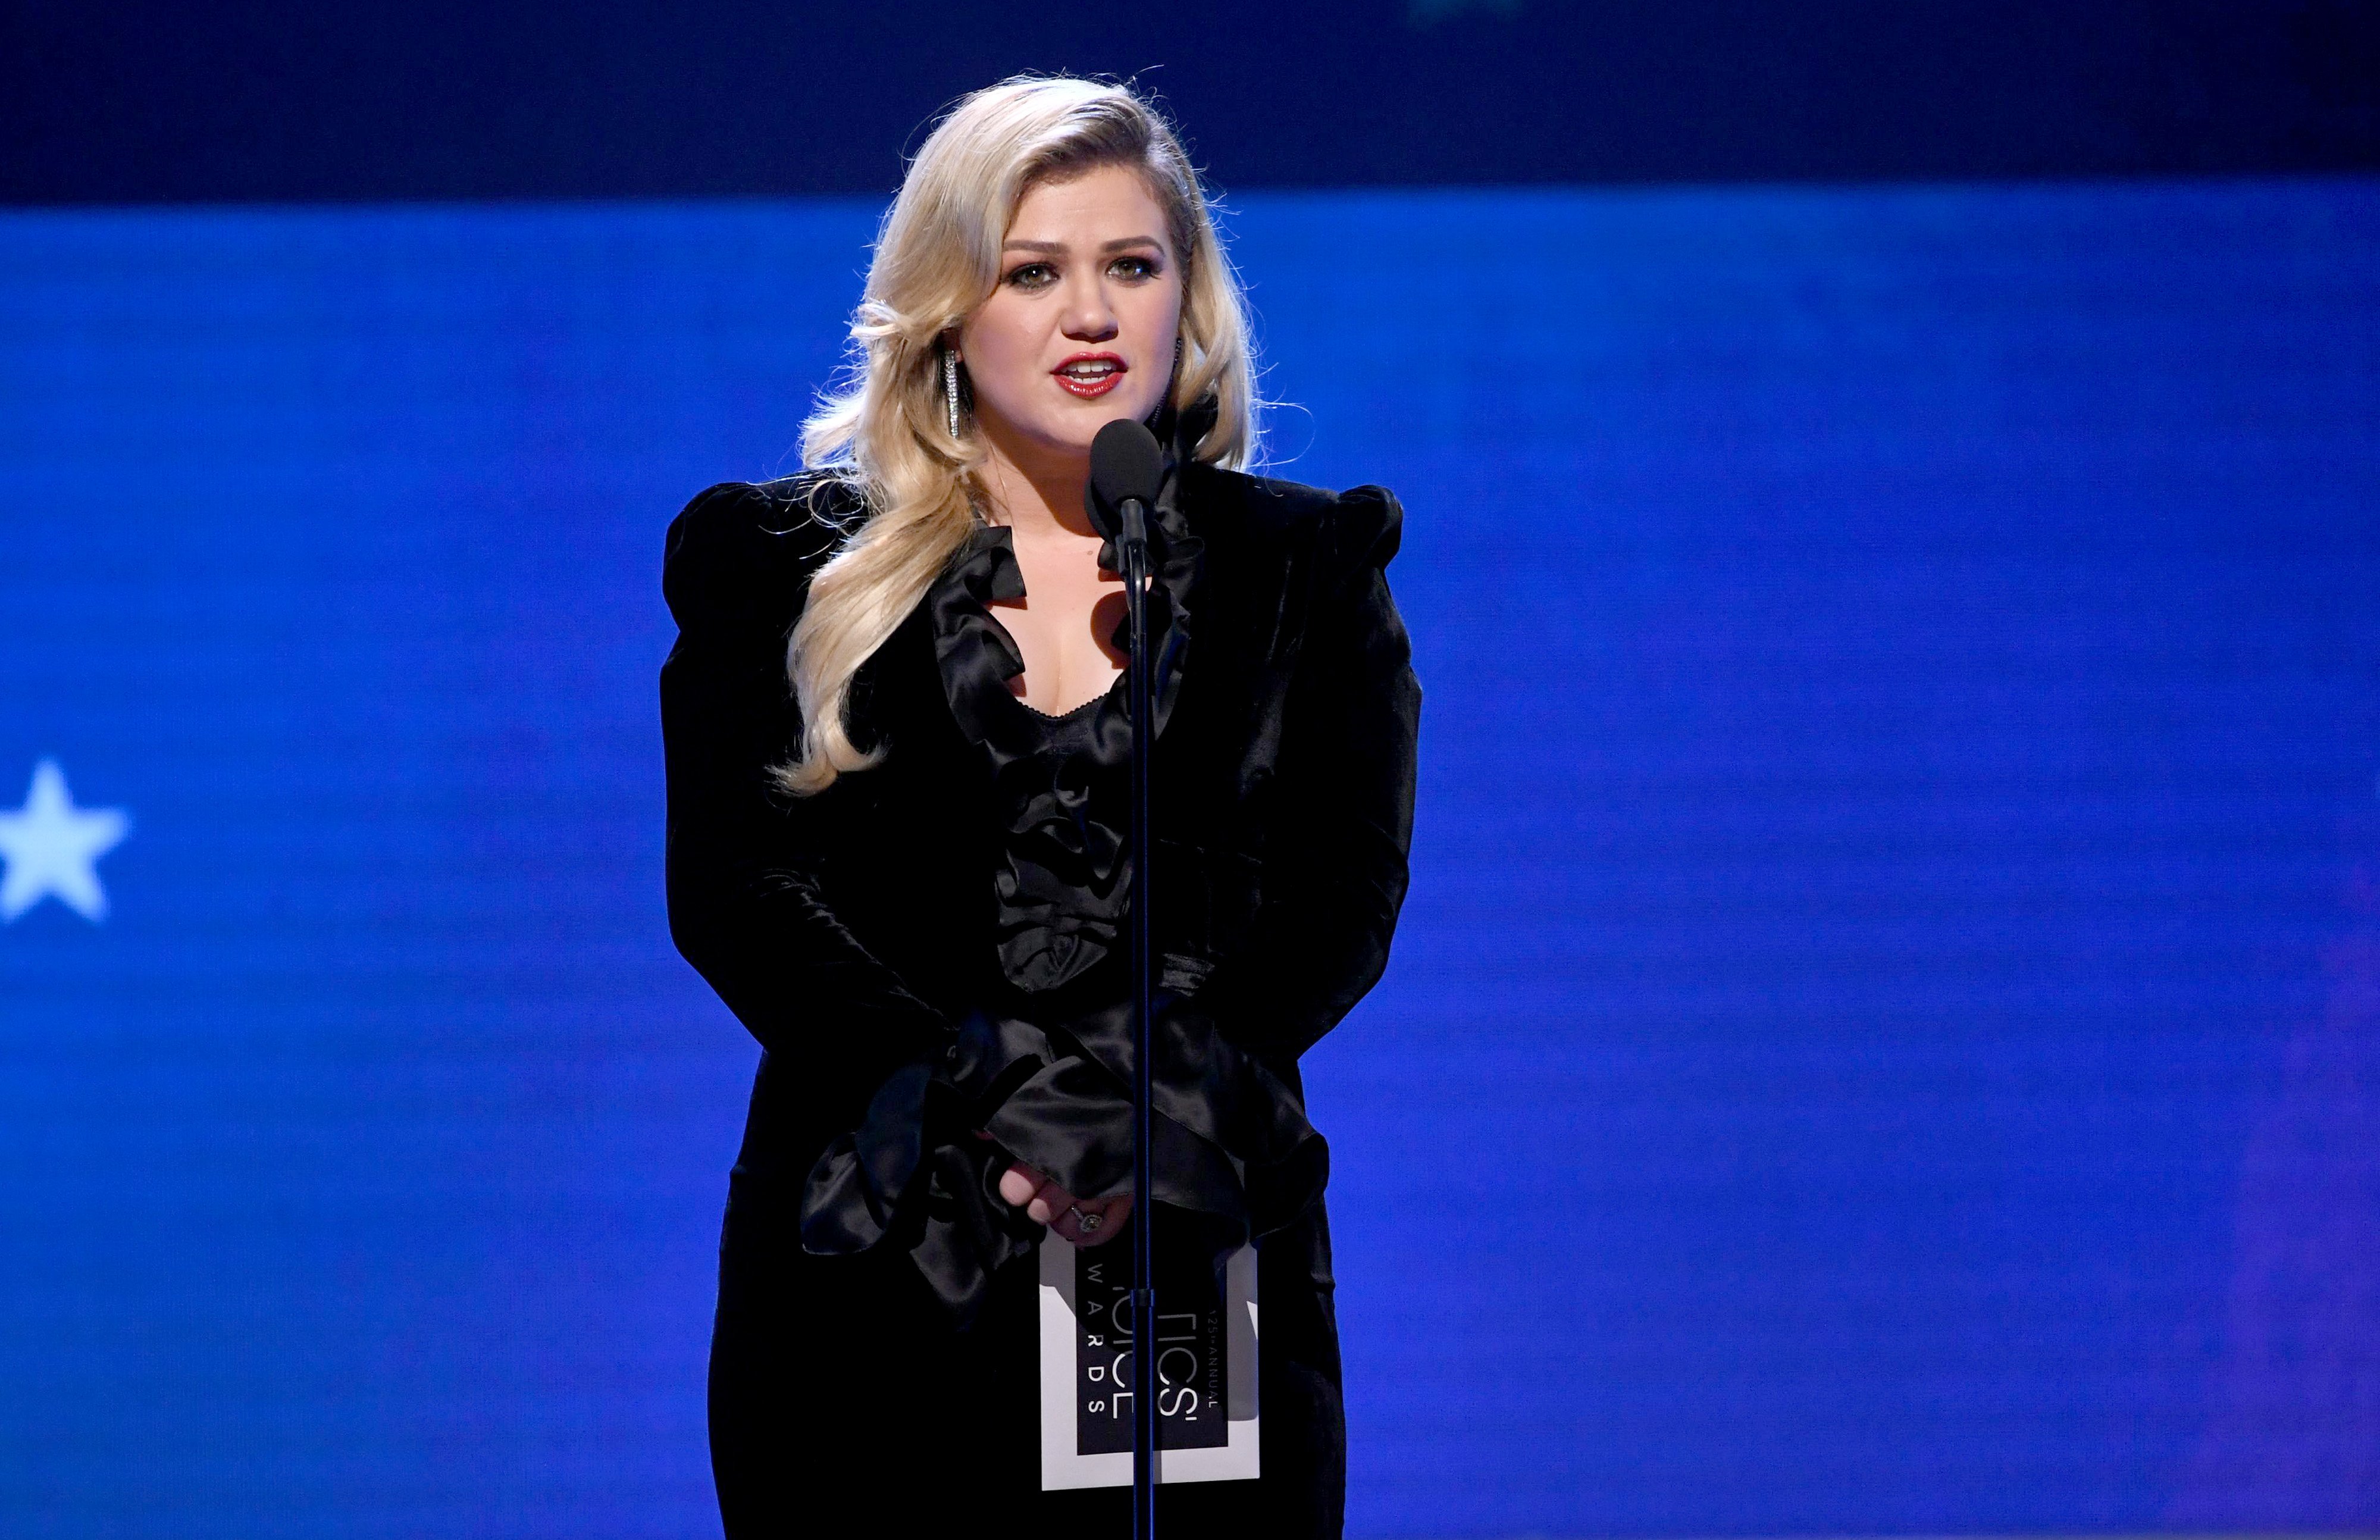 Kelly Clarkson speaks onstage during the 25th Annual Critics' Choice Awards at Barker Hangar on January 12, 2020 | Photo: Getty Images